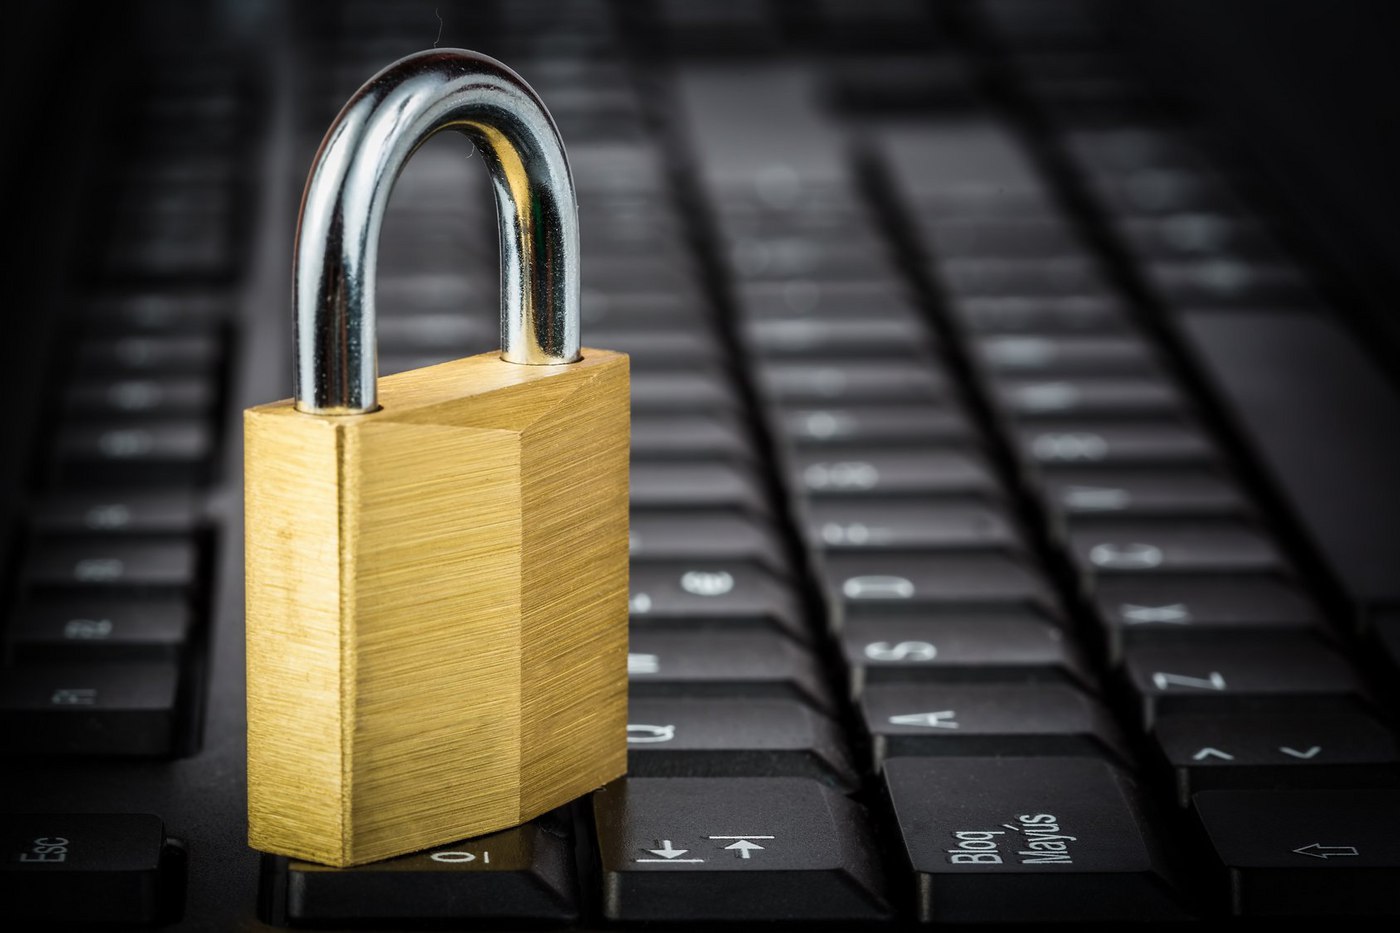 Healthcare data security: A growing issue in 2015